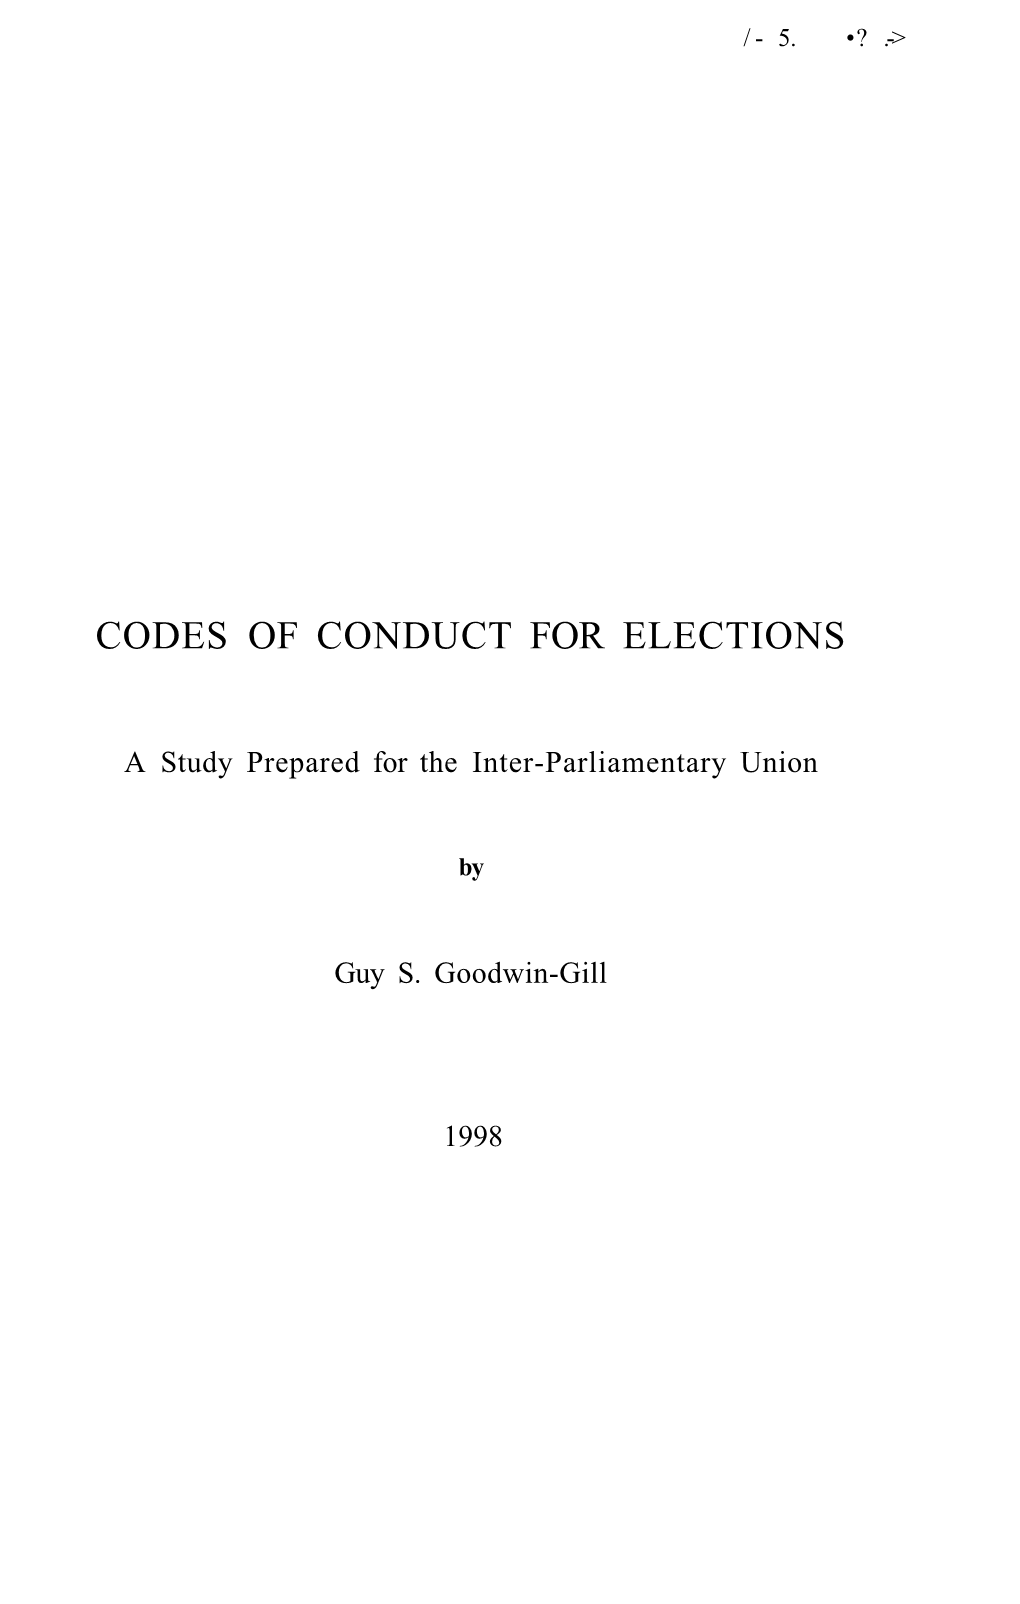 Codes of Conduct for Elections